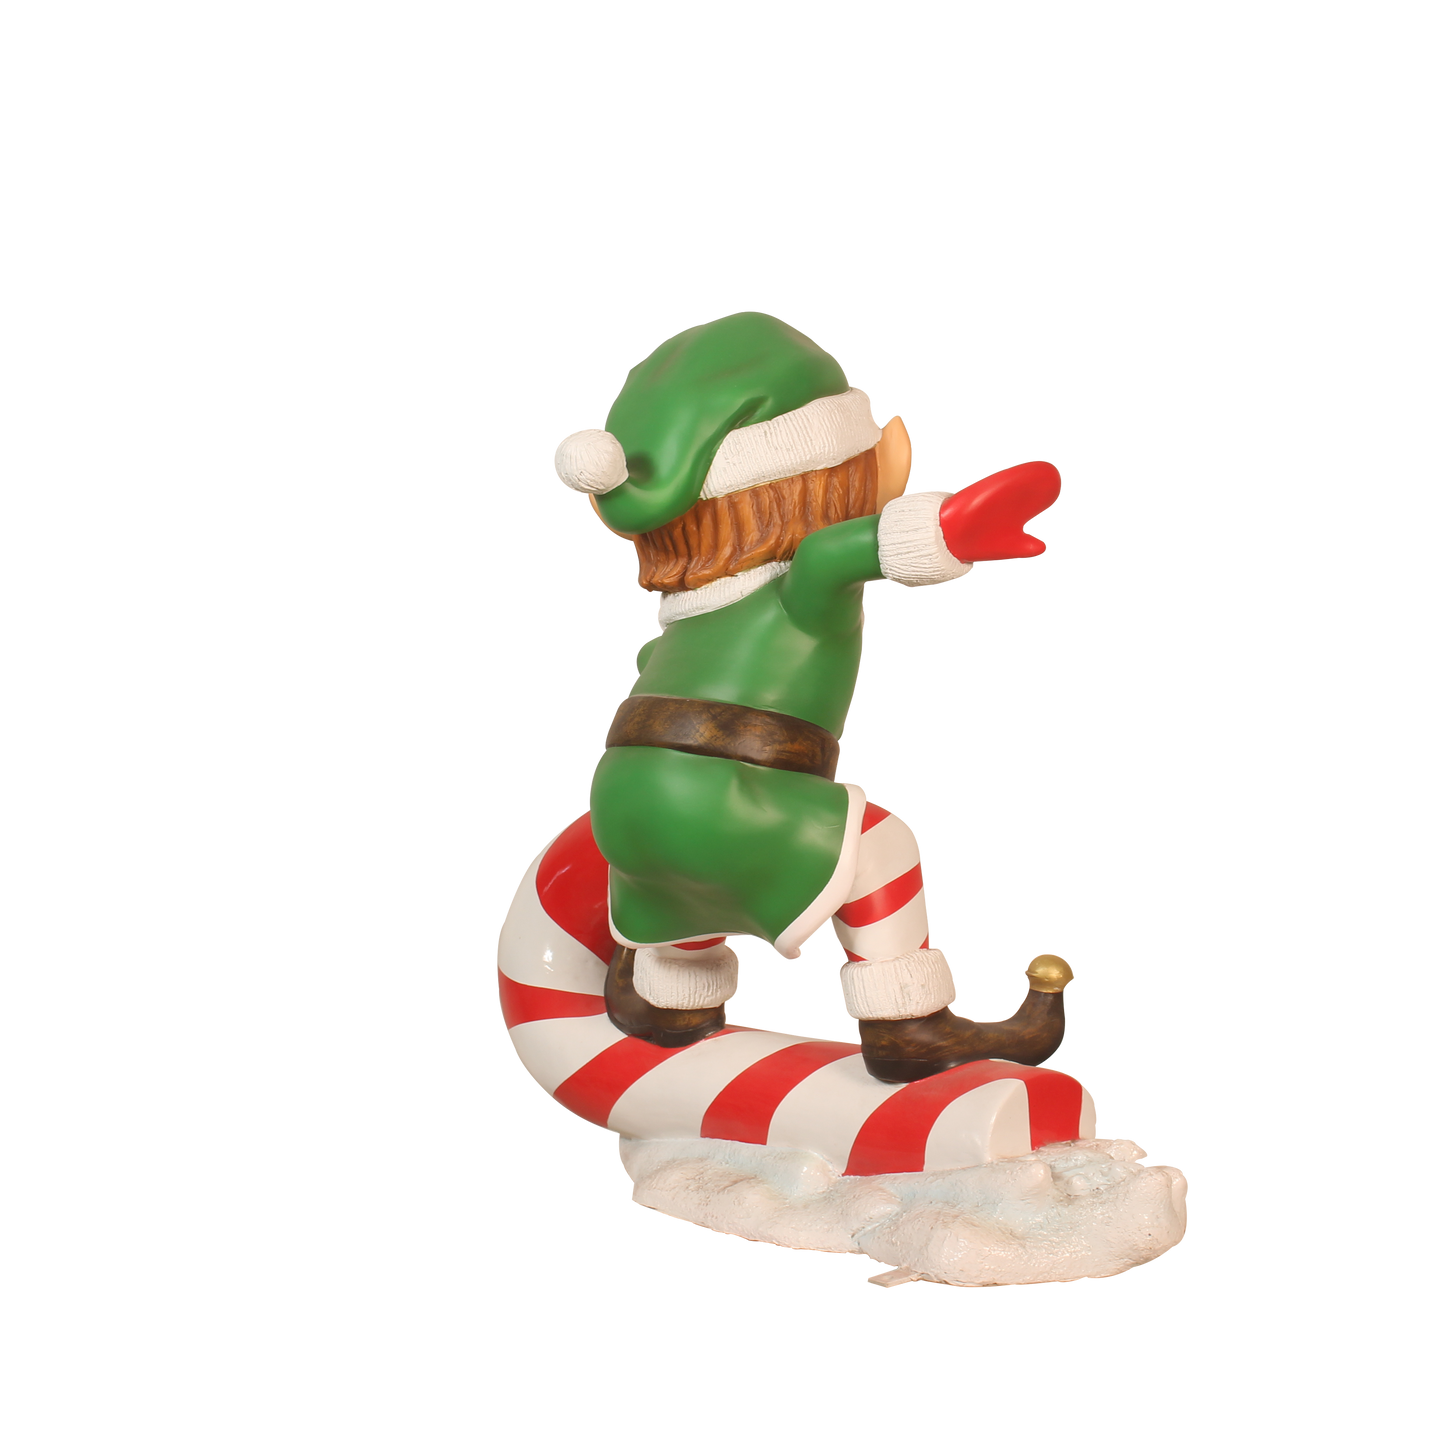 2ft 11in Fiberglass Resin Elf Surfing On Candy Cane Statue